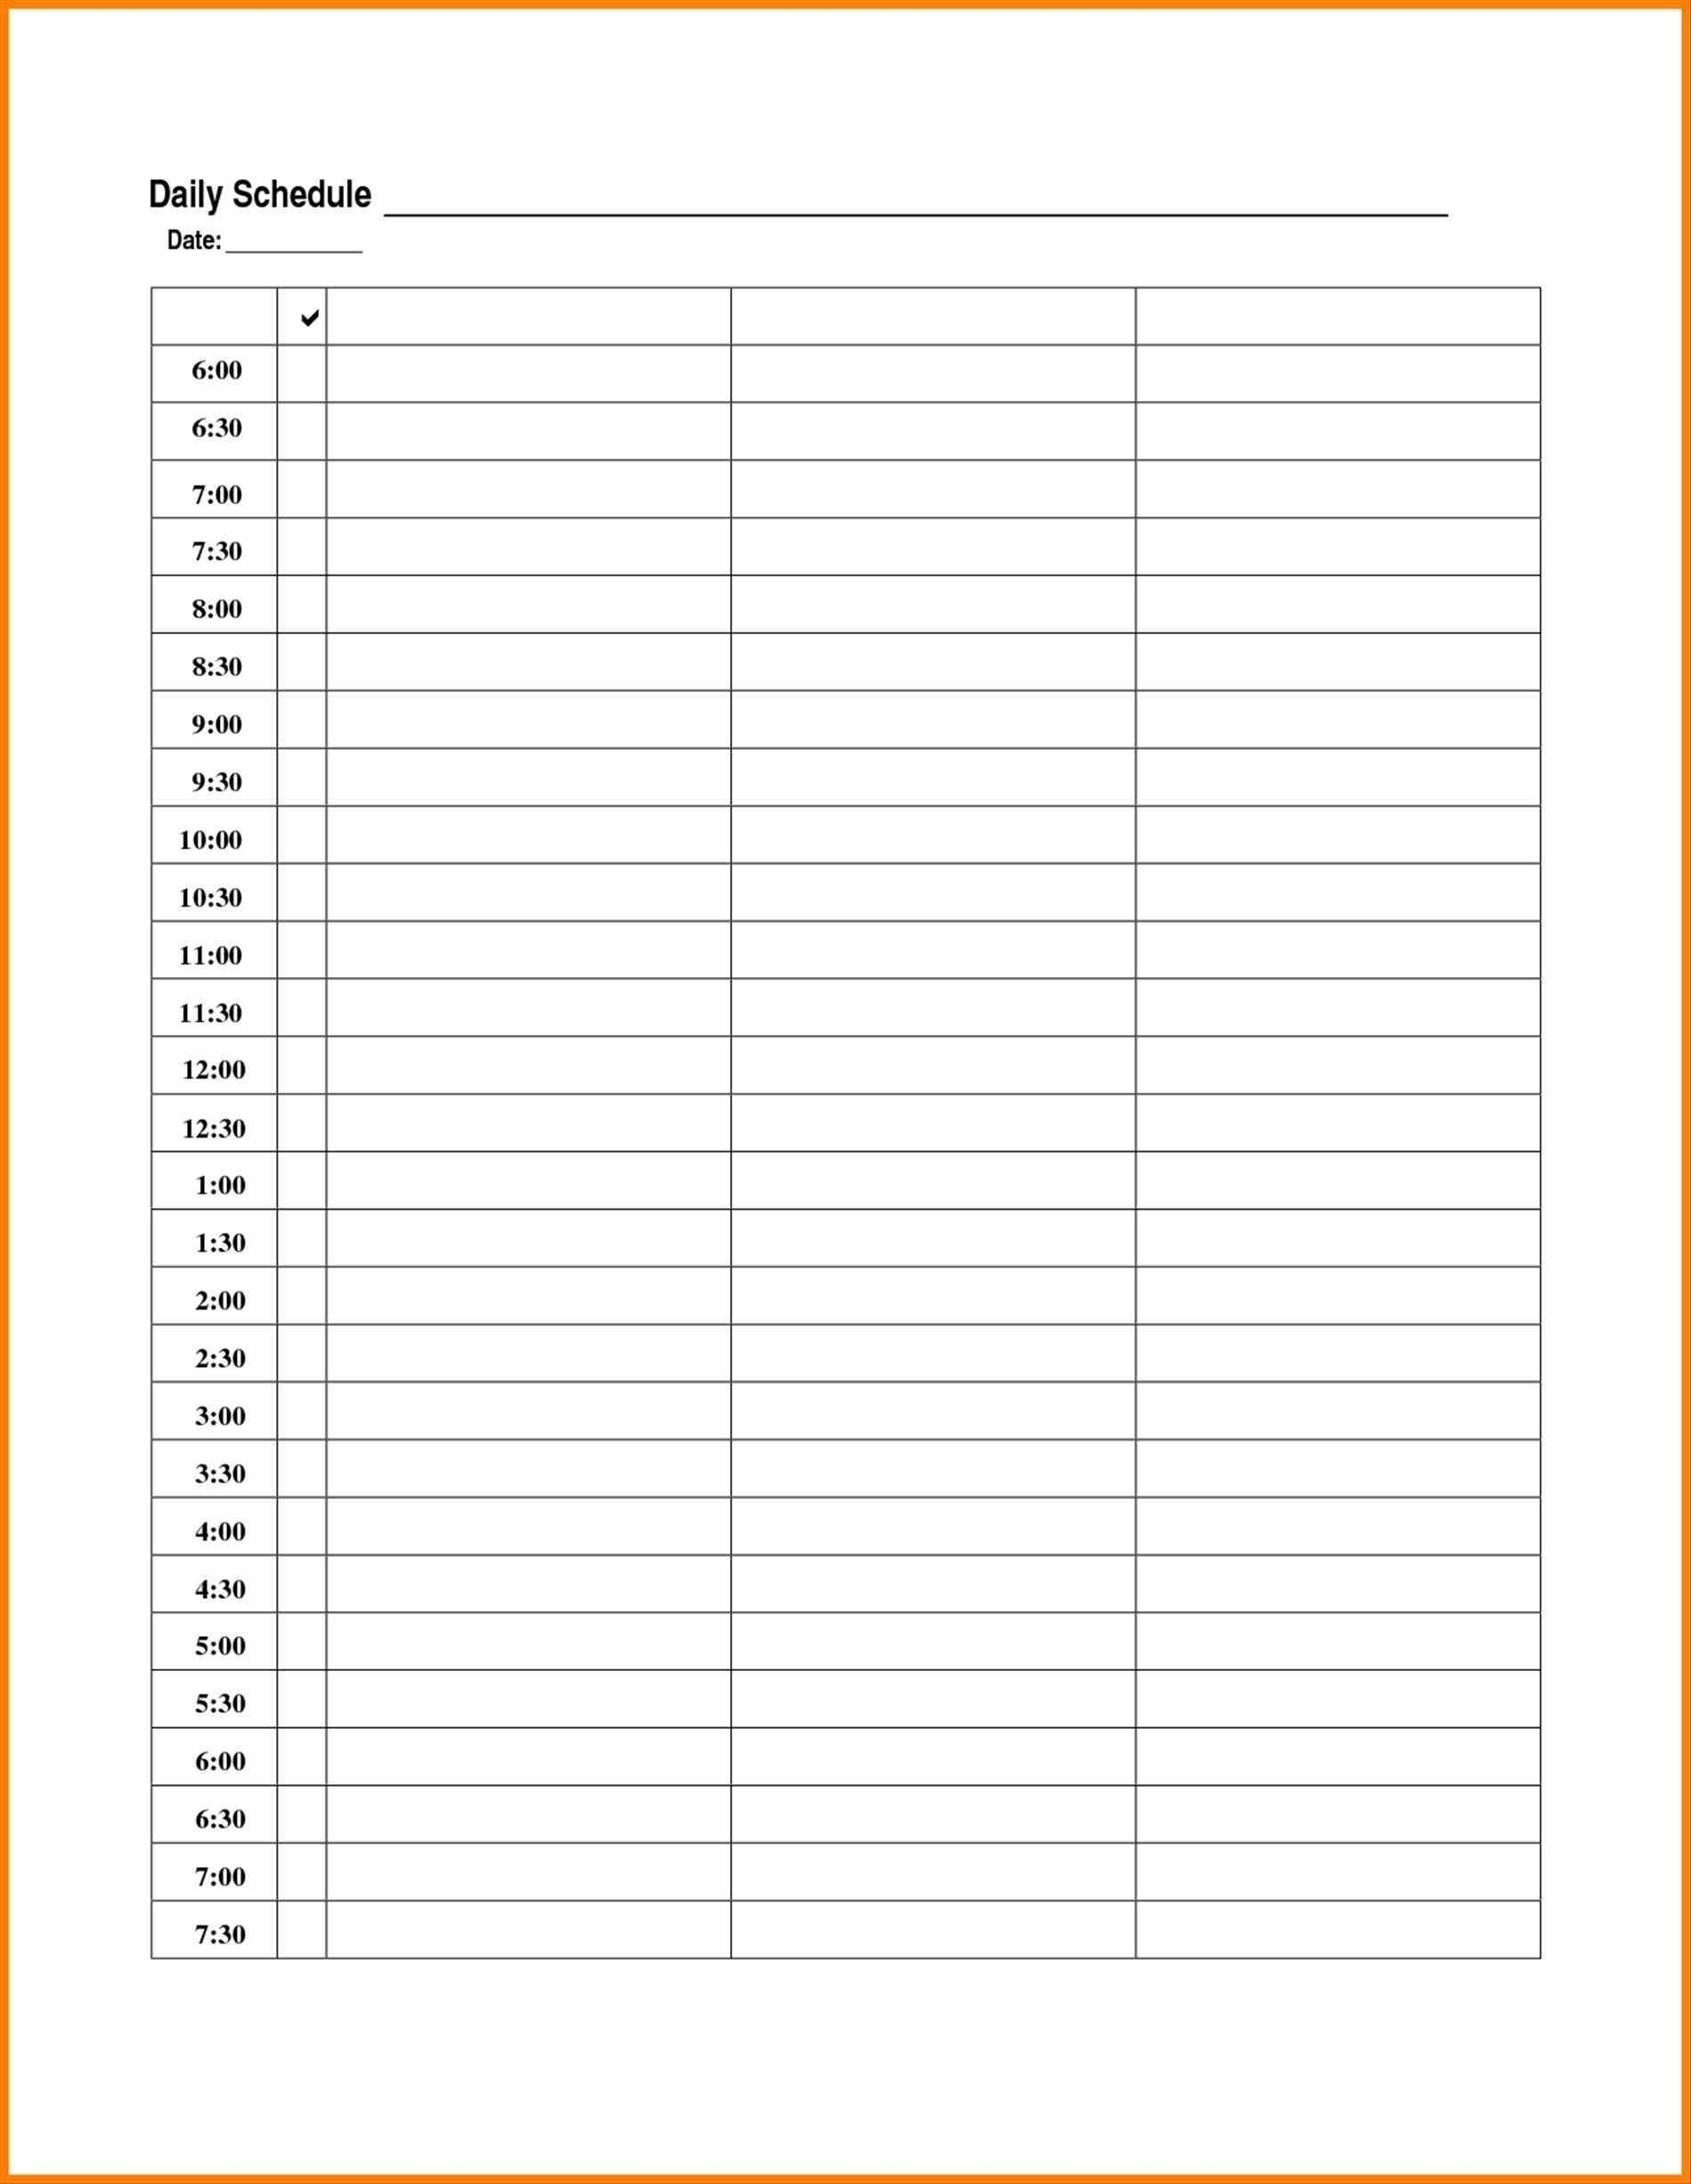 Daily Calendar Template In 2020 | Daily Planner Template with regard to Free Priintable Calendar Day By Day